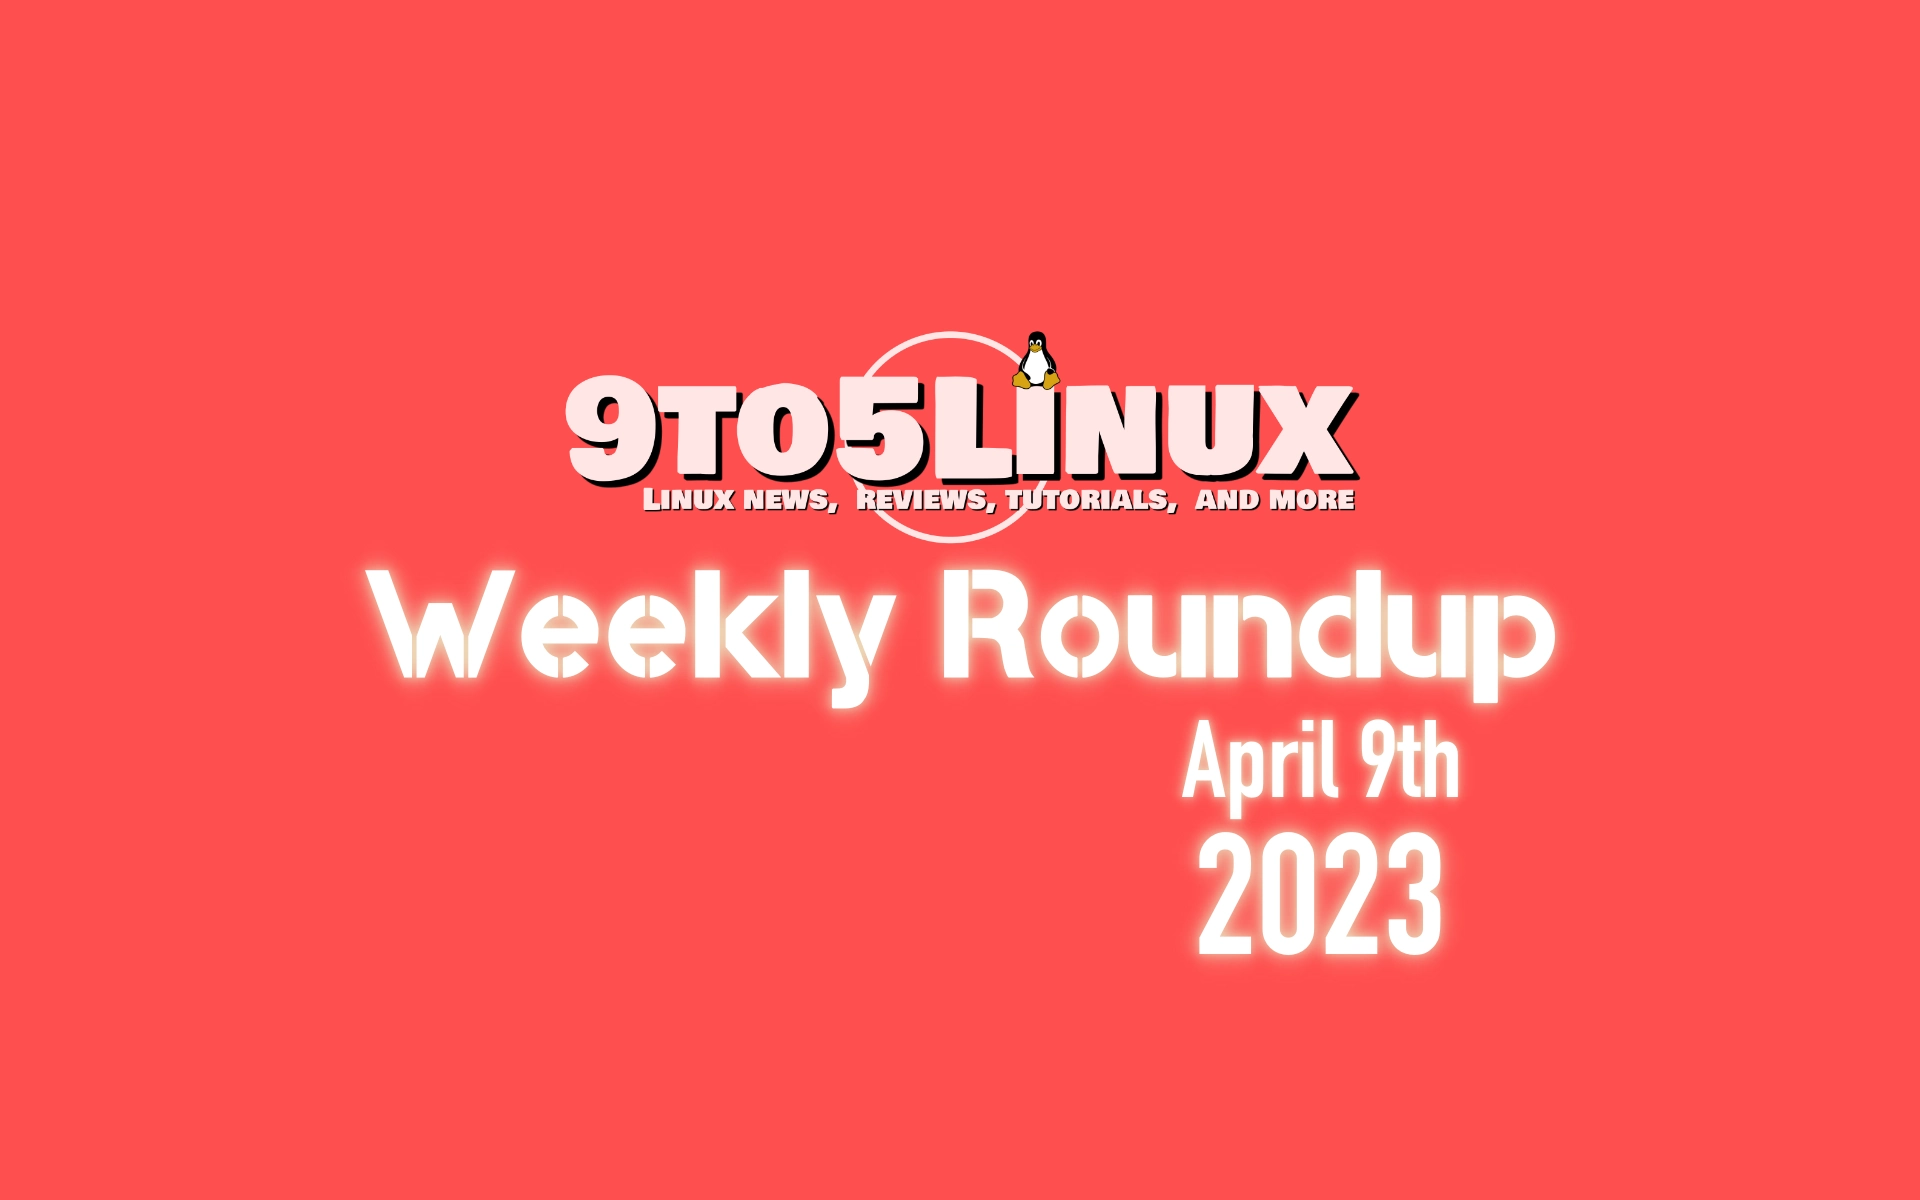 9to5Linux Weekly Roundup: April 9th, 2023